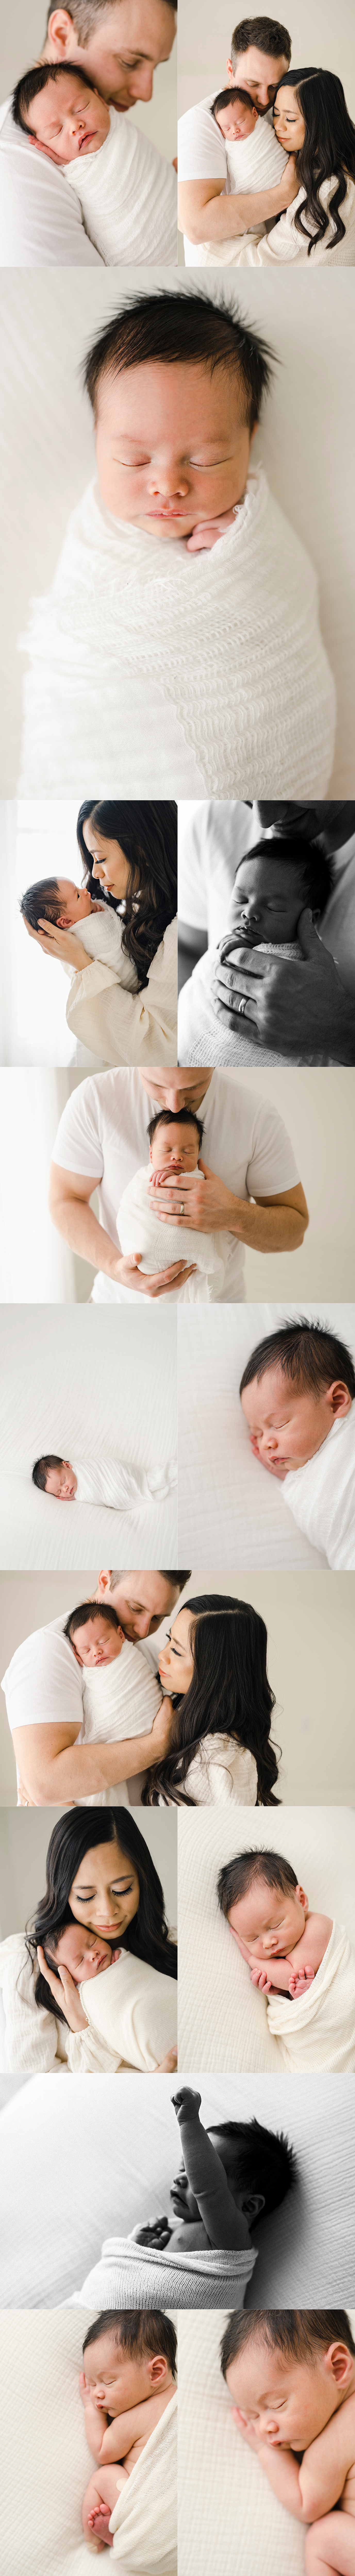 intimate newborn baby photography for heirloom albums